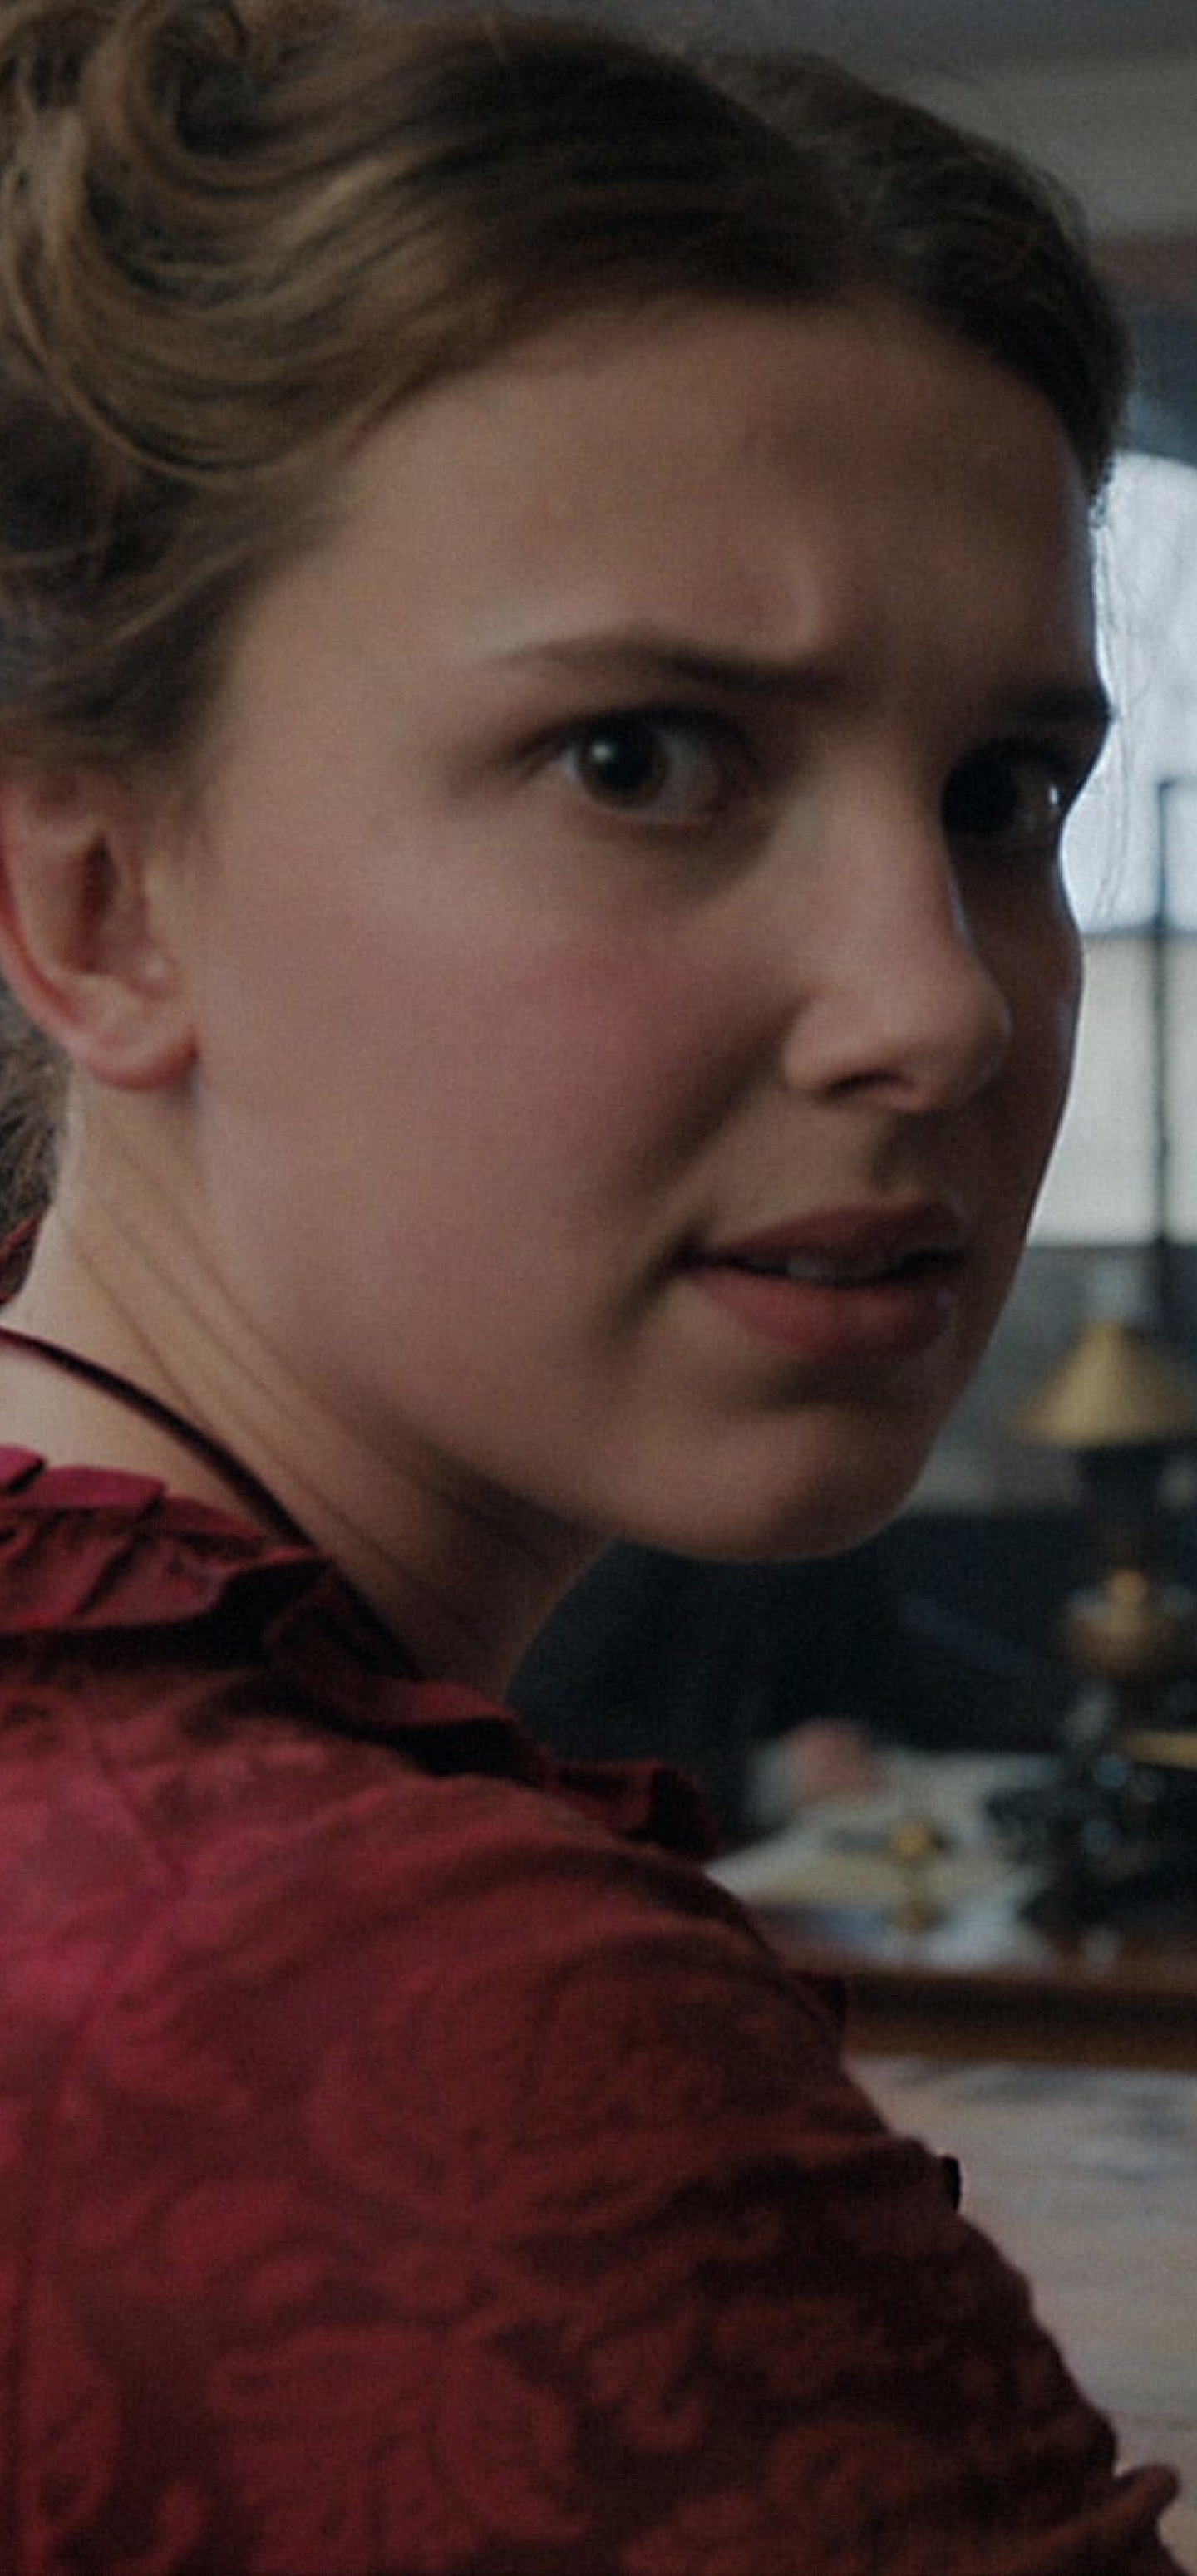 1440x3100 Millie Bobby Brown From Enola Holmes Netflix 1440x3100